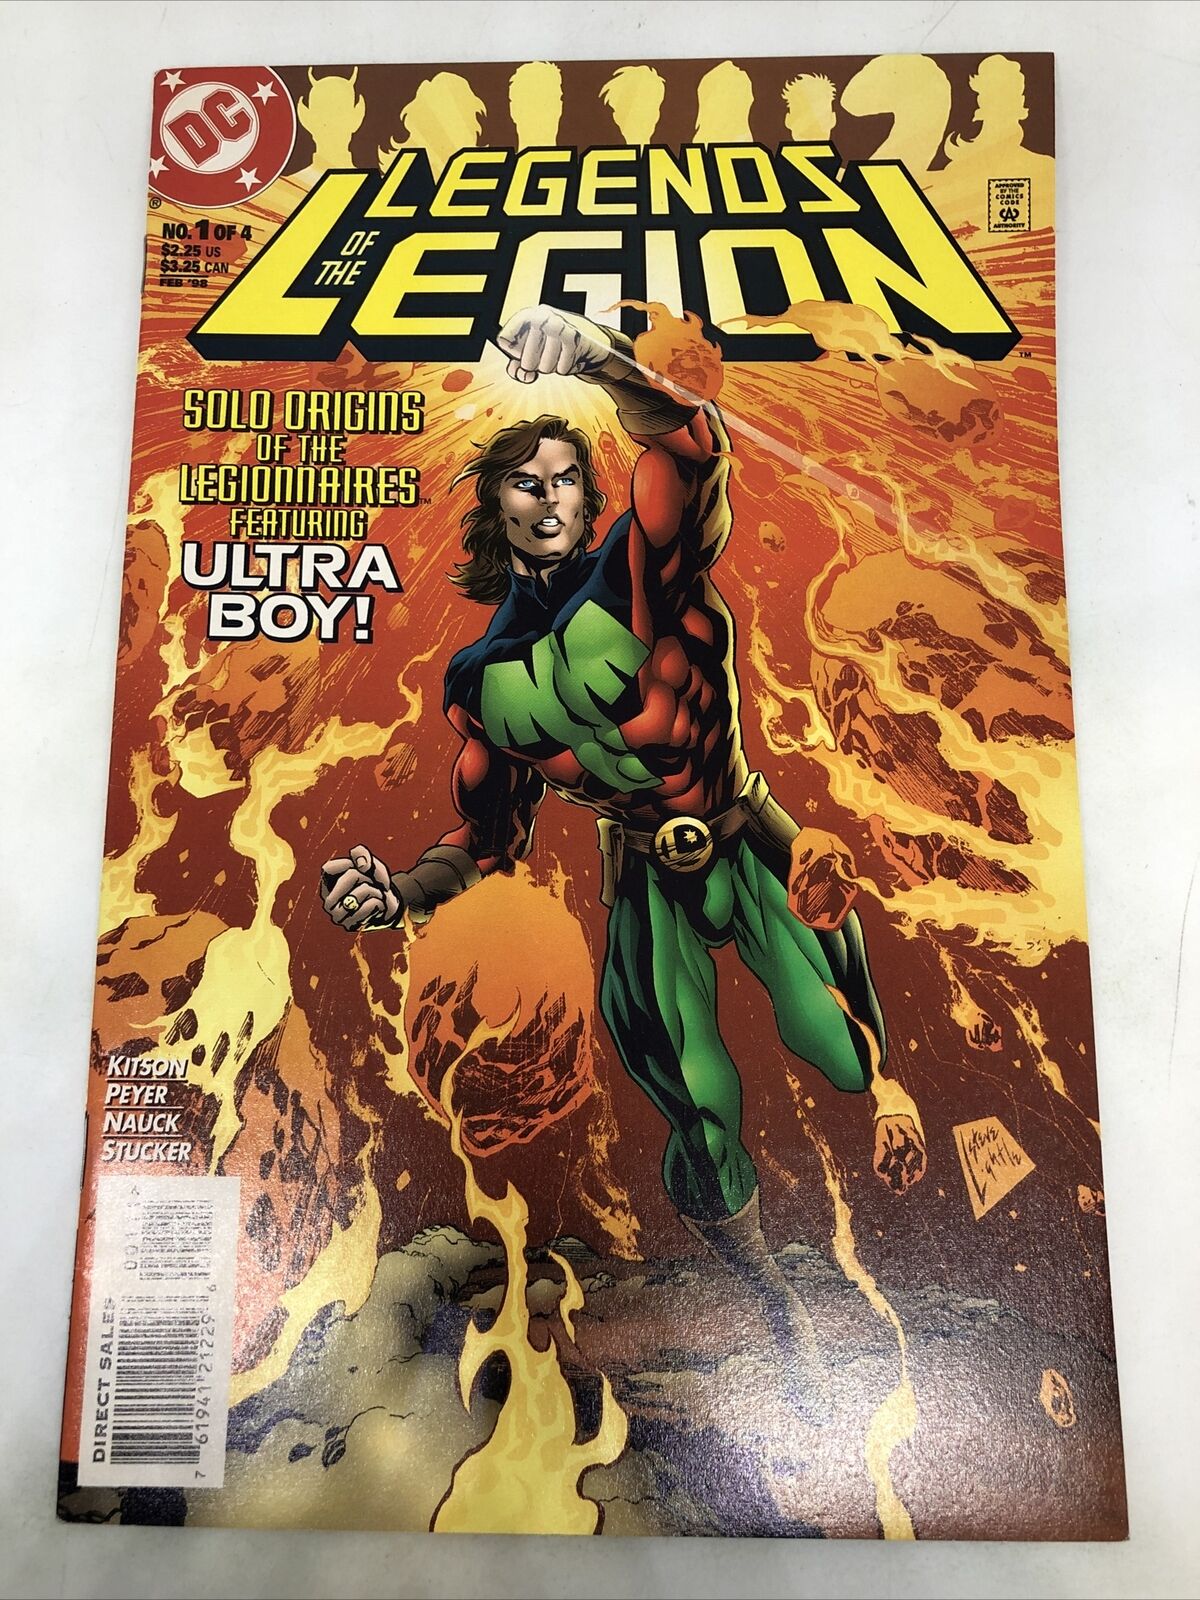 Legends of the Legion #1 February 1998